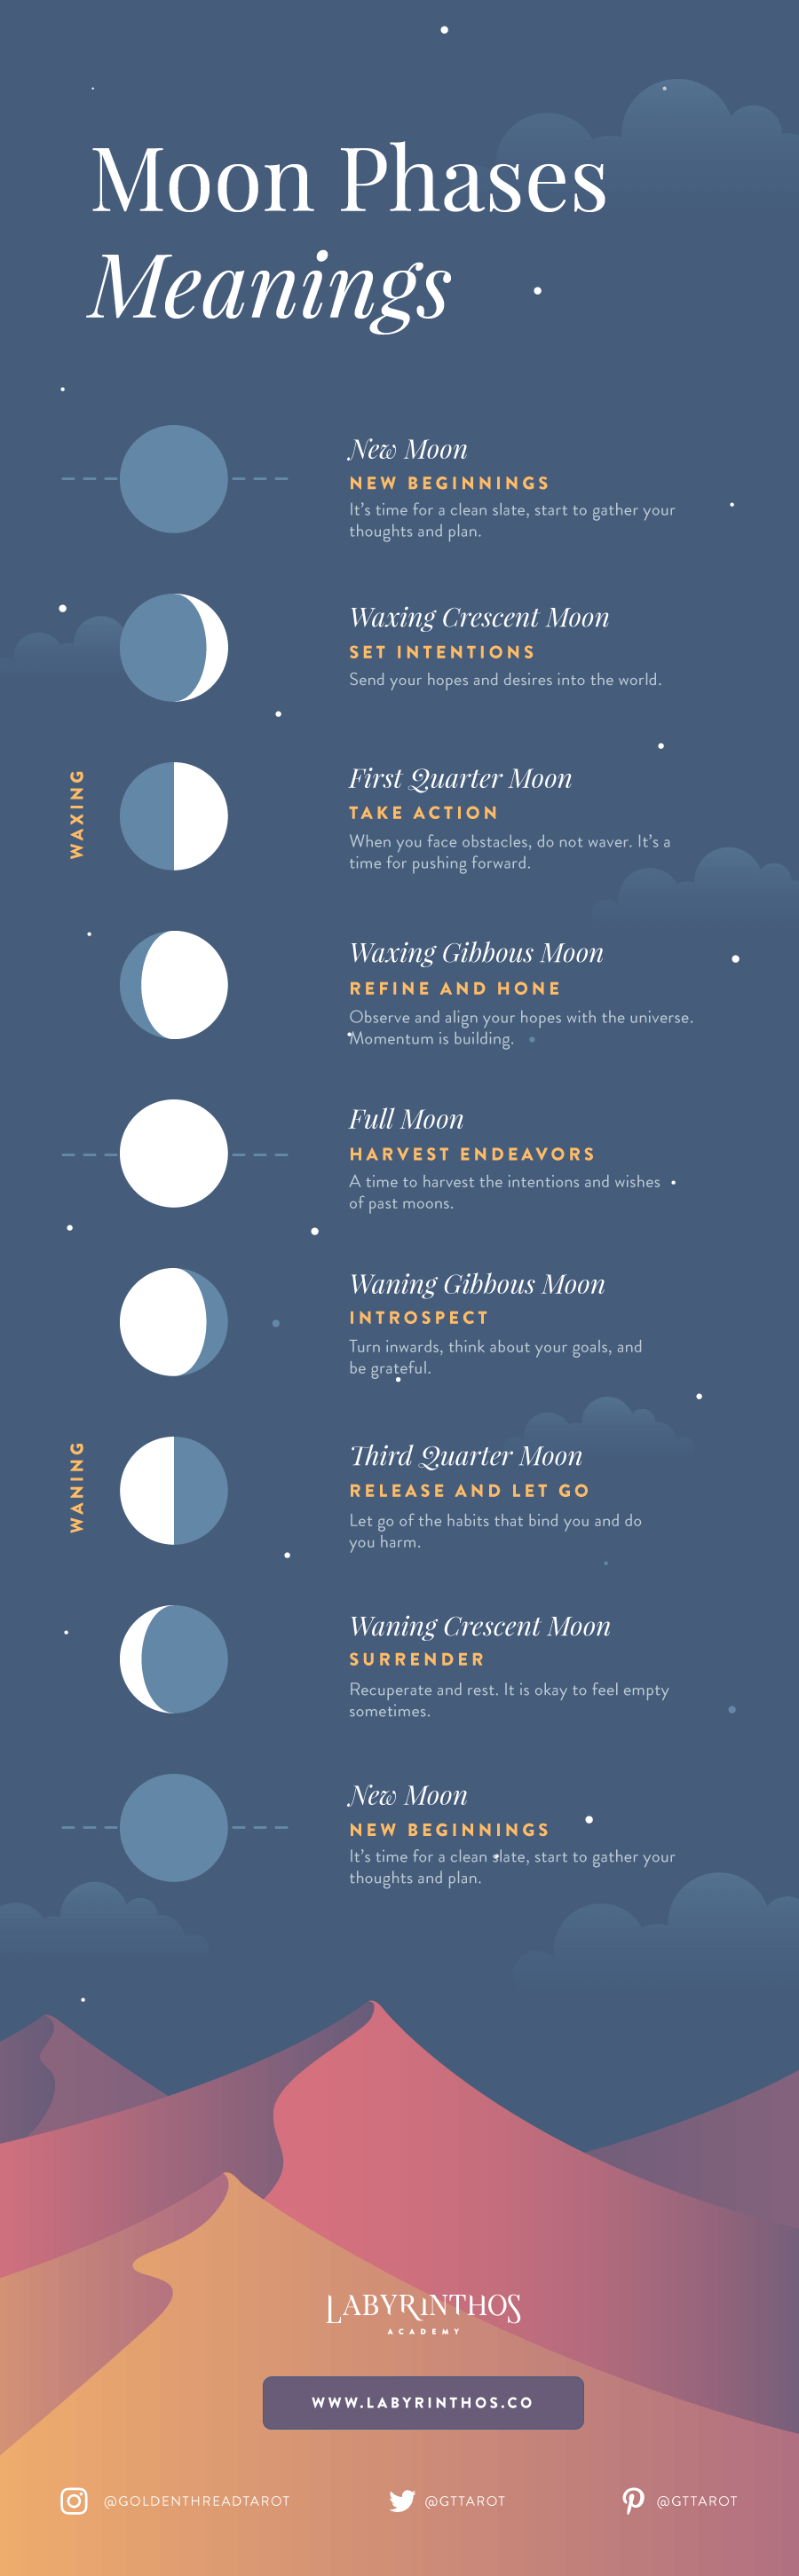 The Moon's Phases and What They Represent - Balance